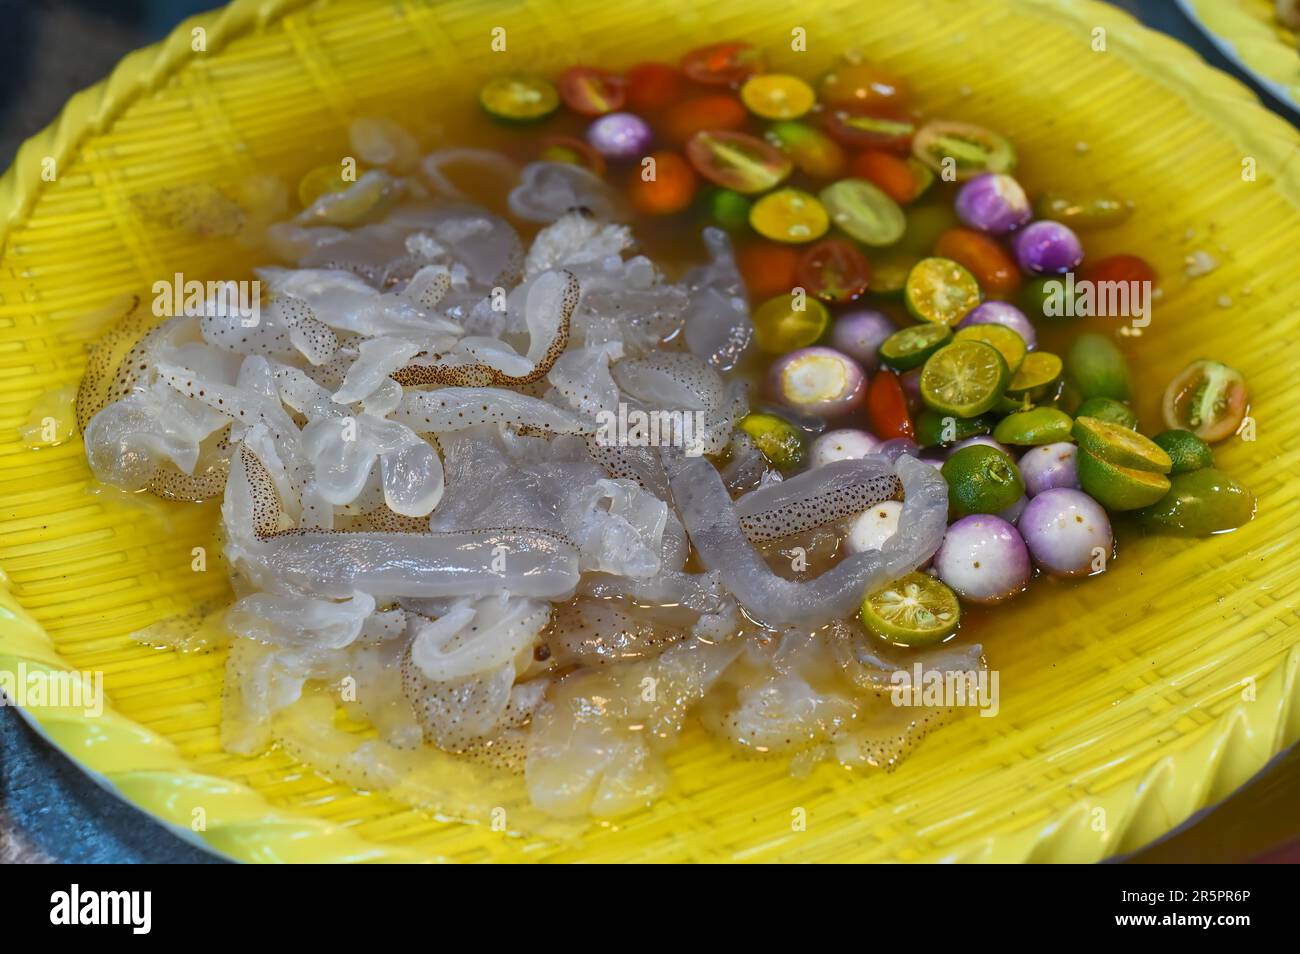 Vietnamese dish Jellyfish tentacles in sauce with vegetables Stock Photo